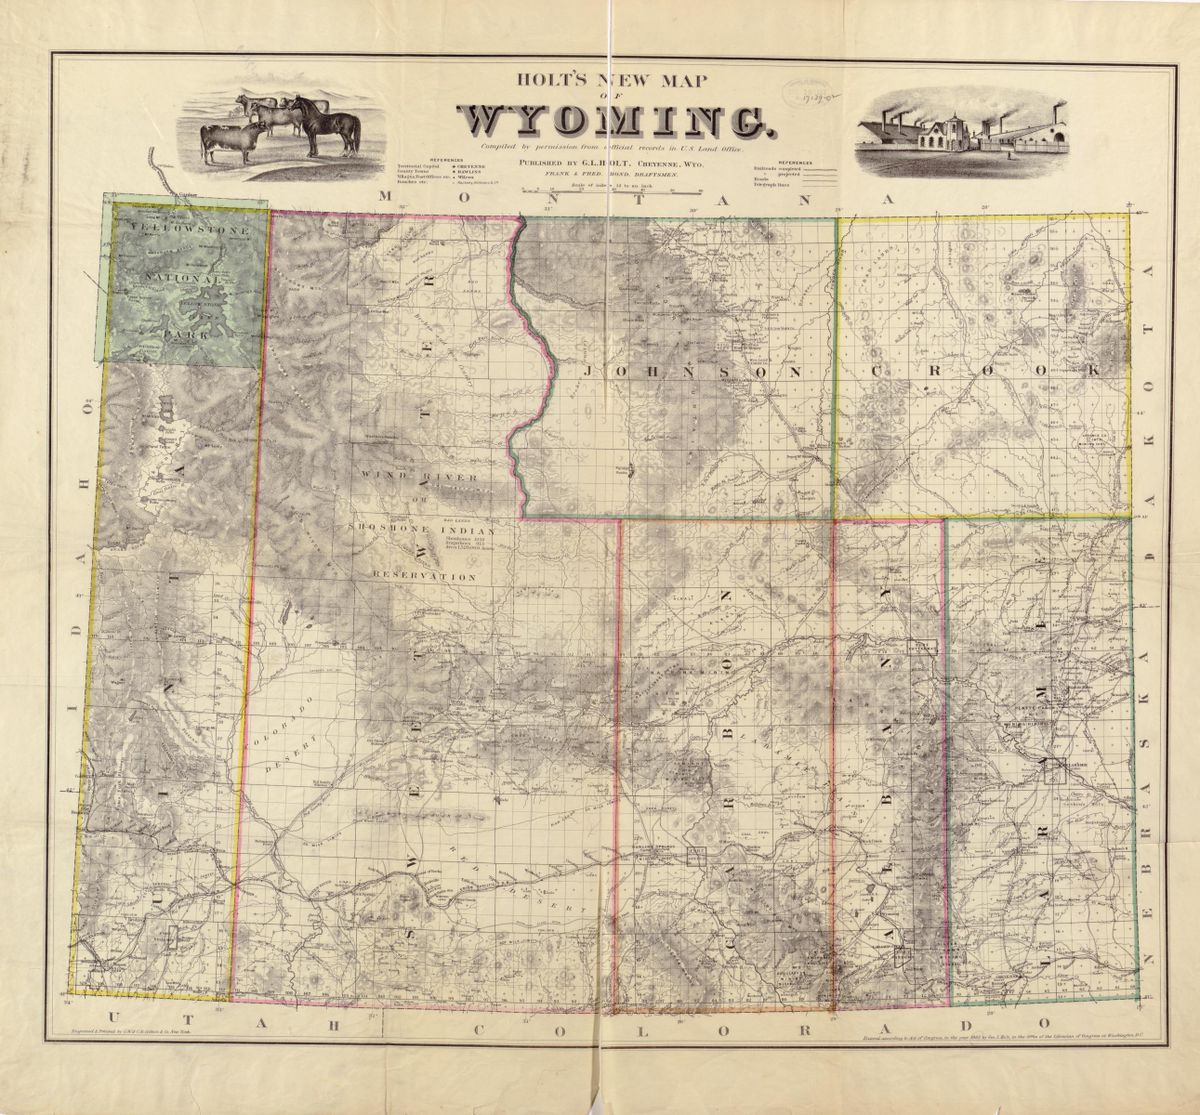 Holt's new map of Wyoming